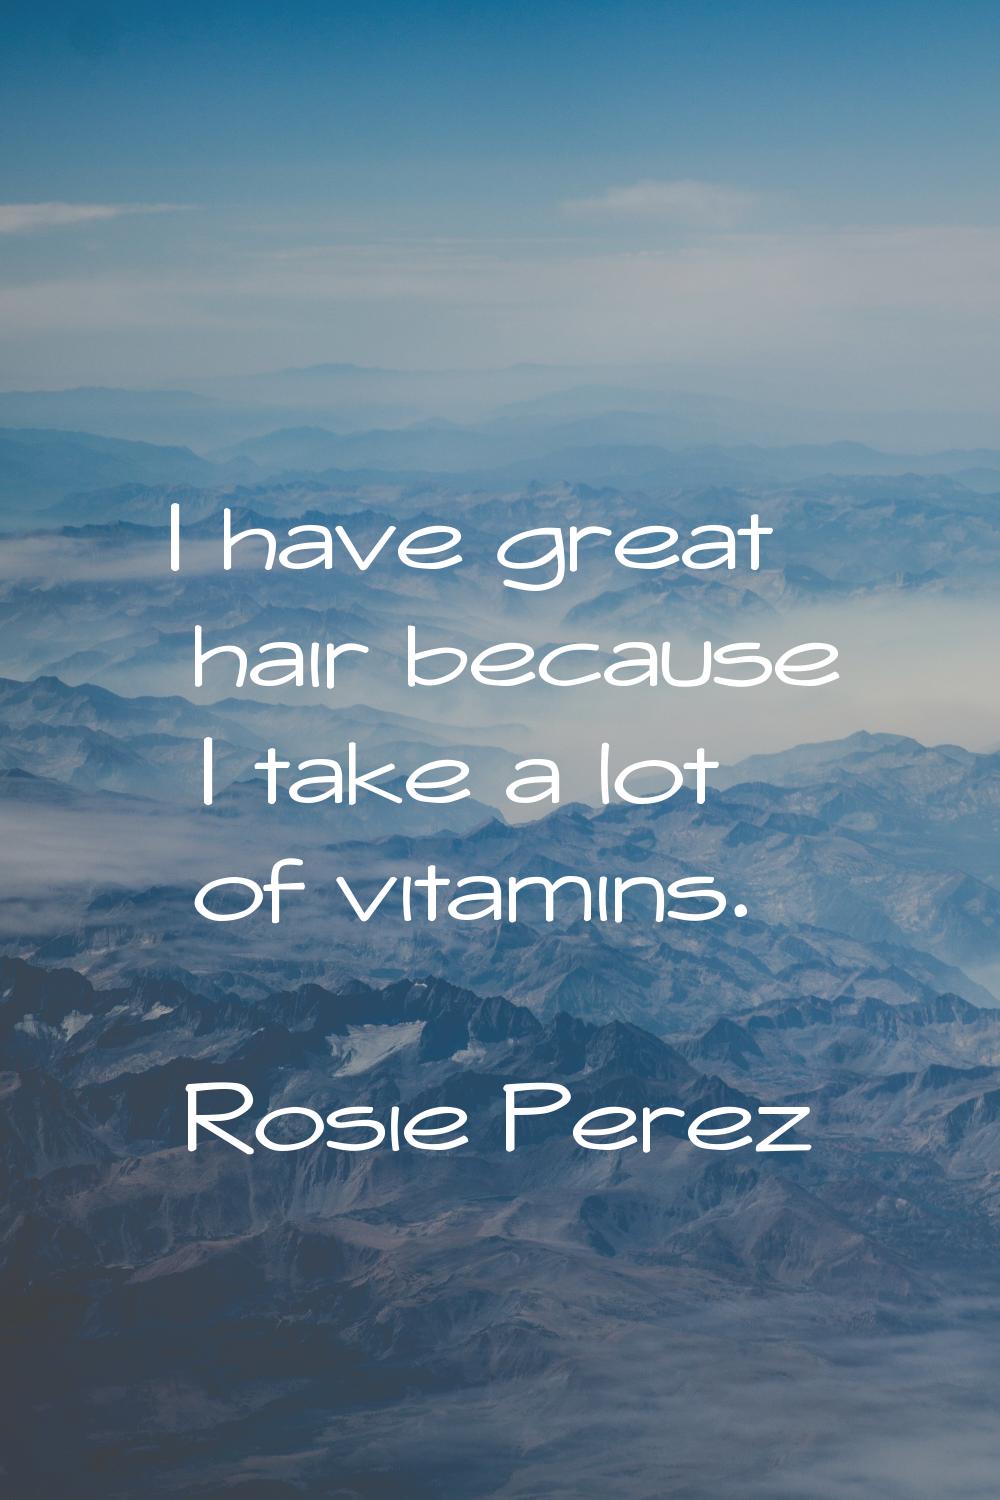 I have great hair because I take a lot of vitamins.